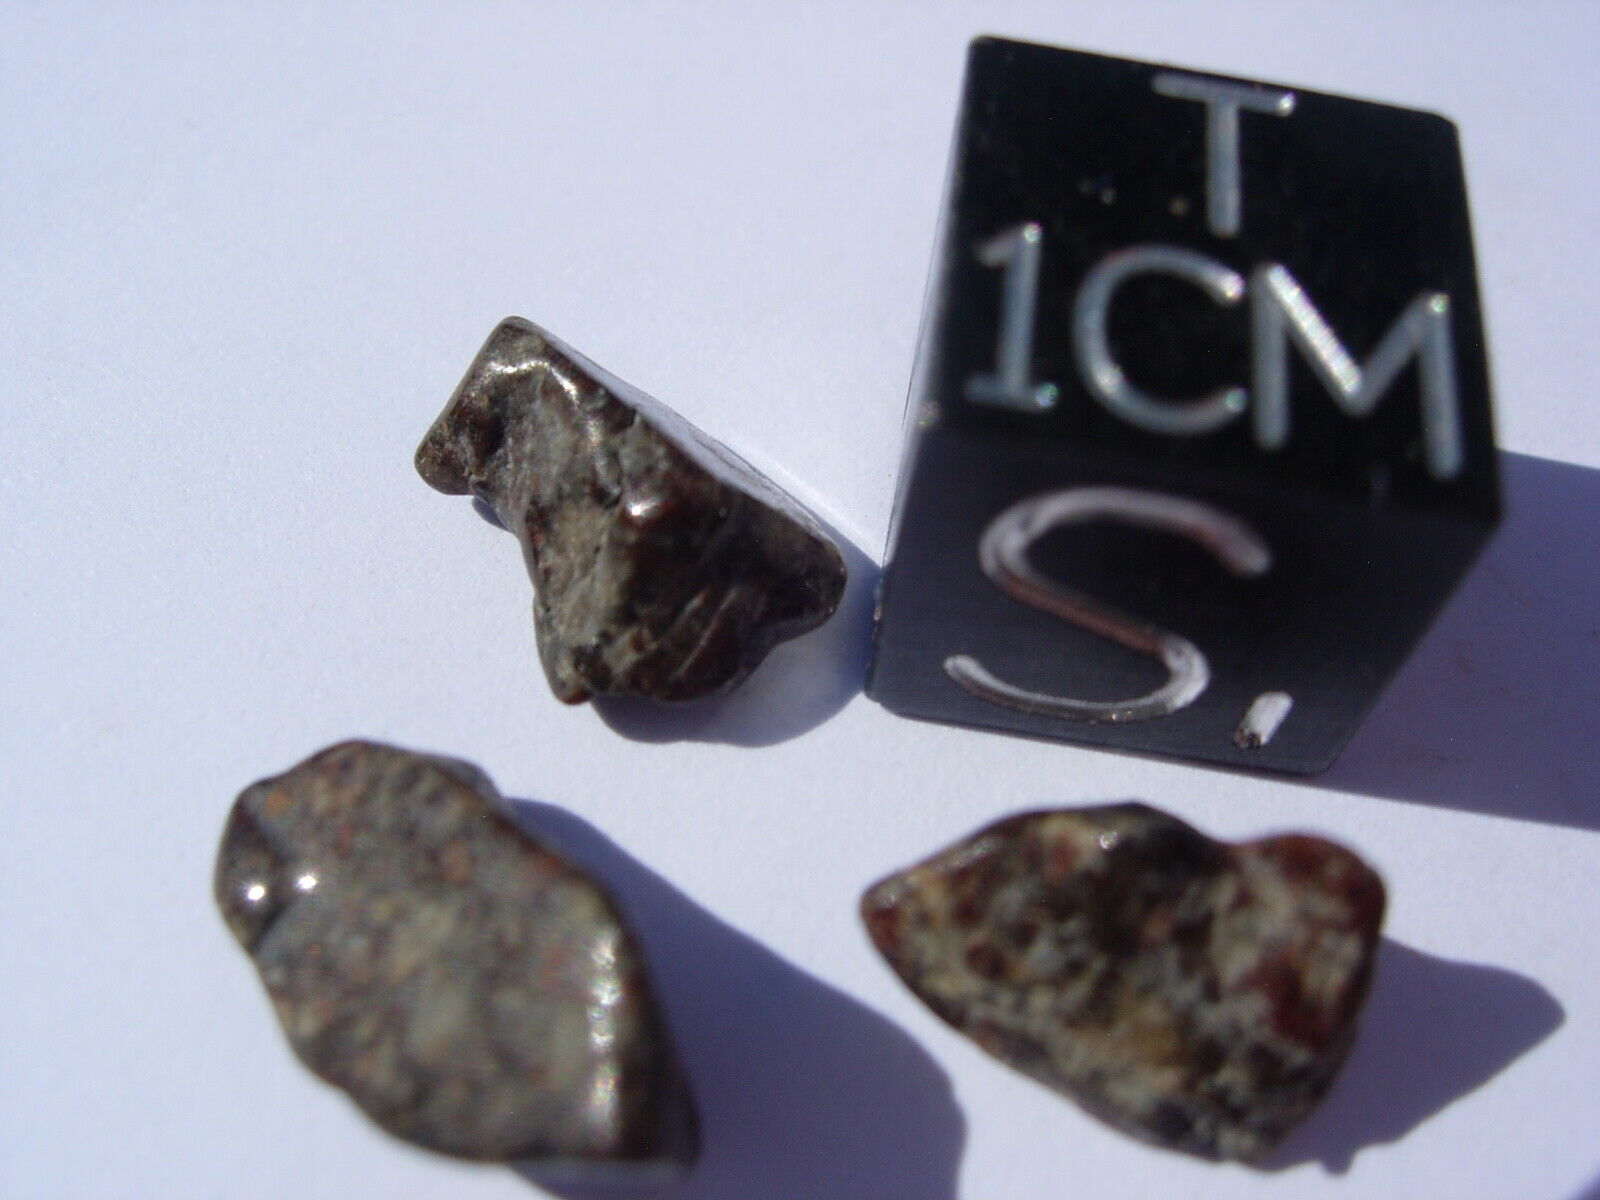 1.27 grams for all 3 NWA 869 Meteorite (class L3-6) tumbled fragments with COA